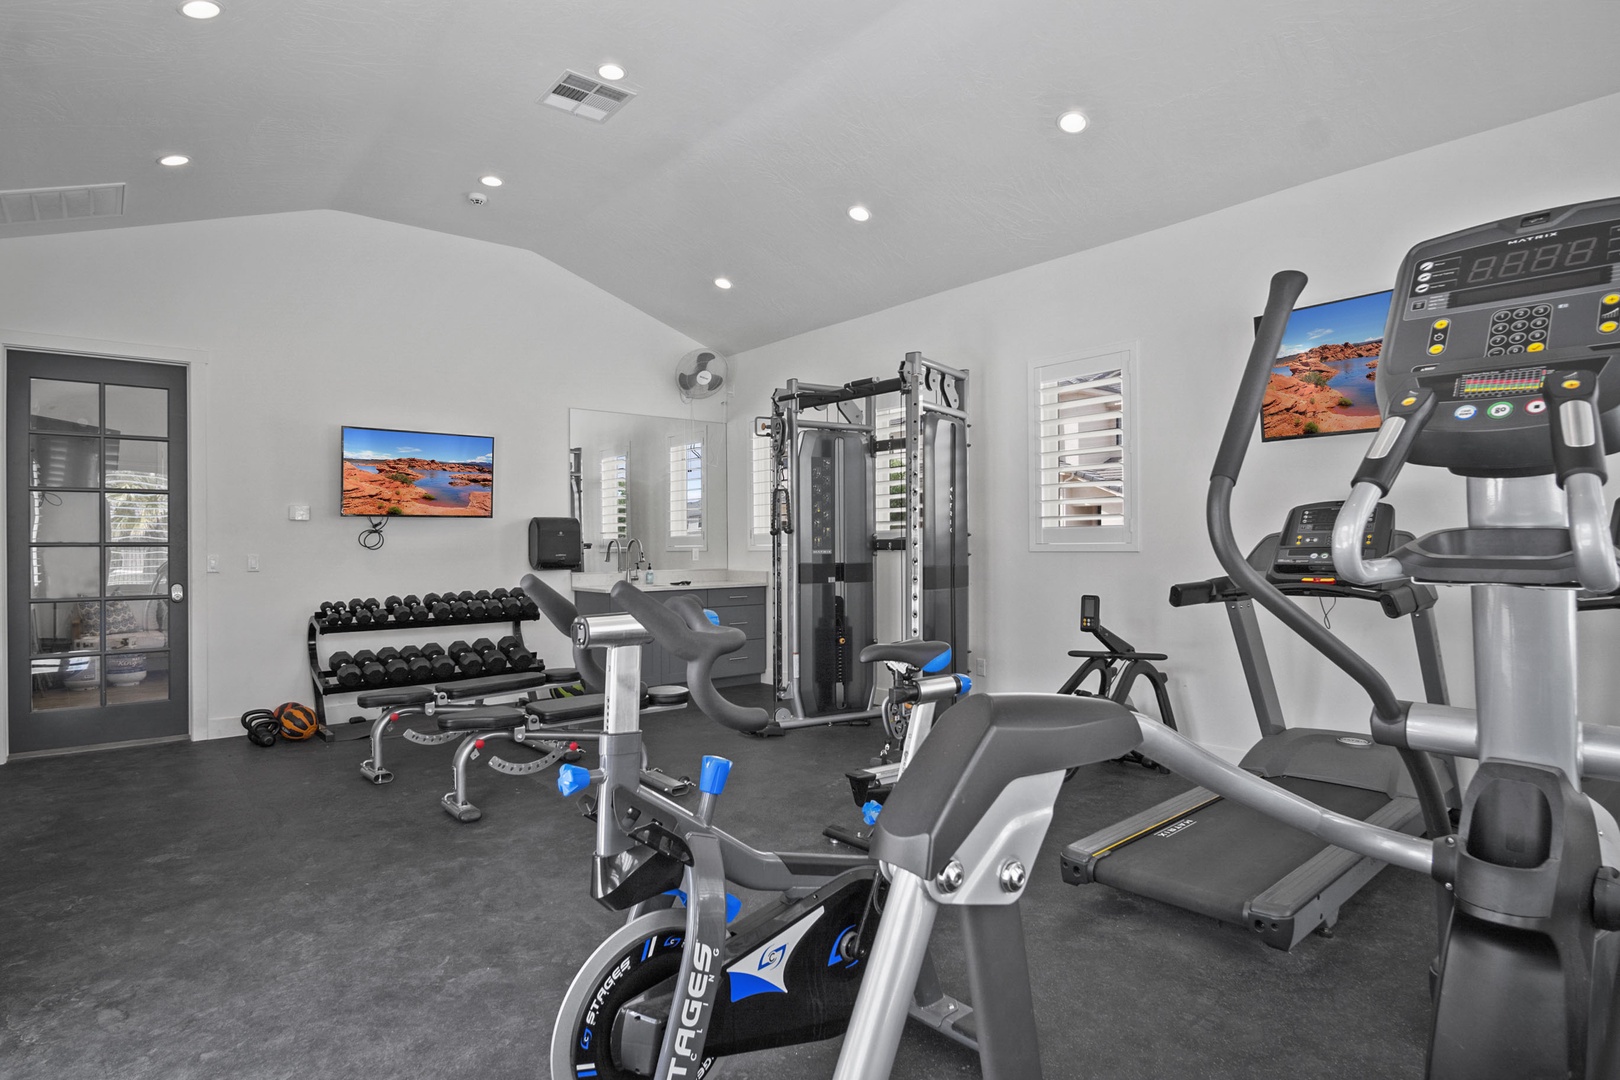 Work up a sweat in the community Fitness Center